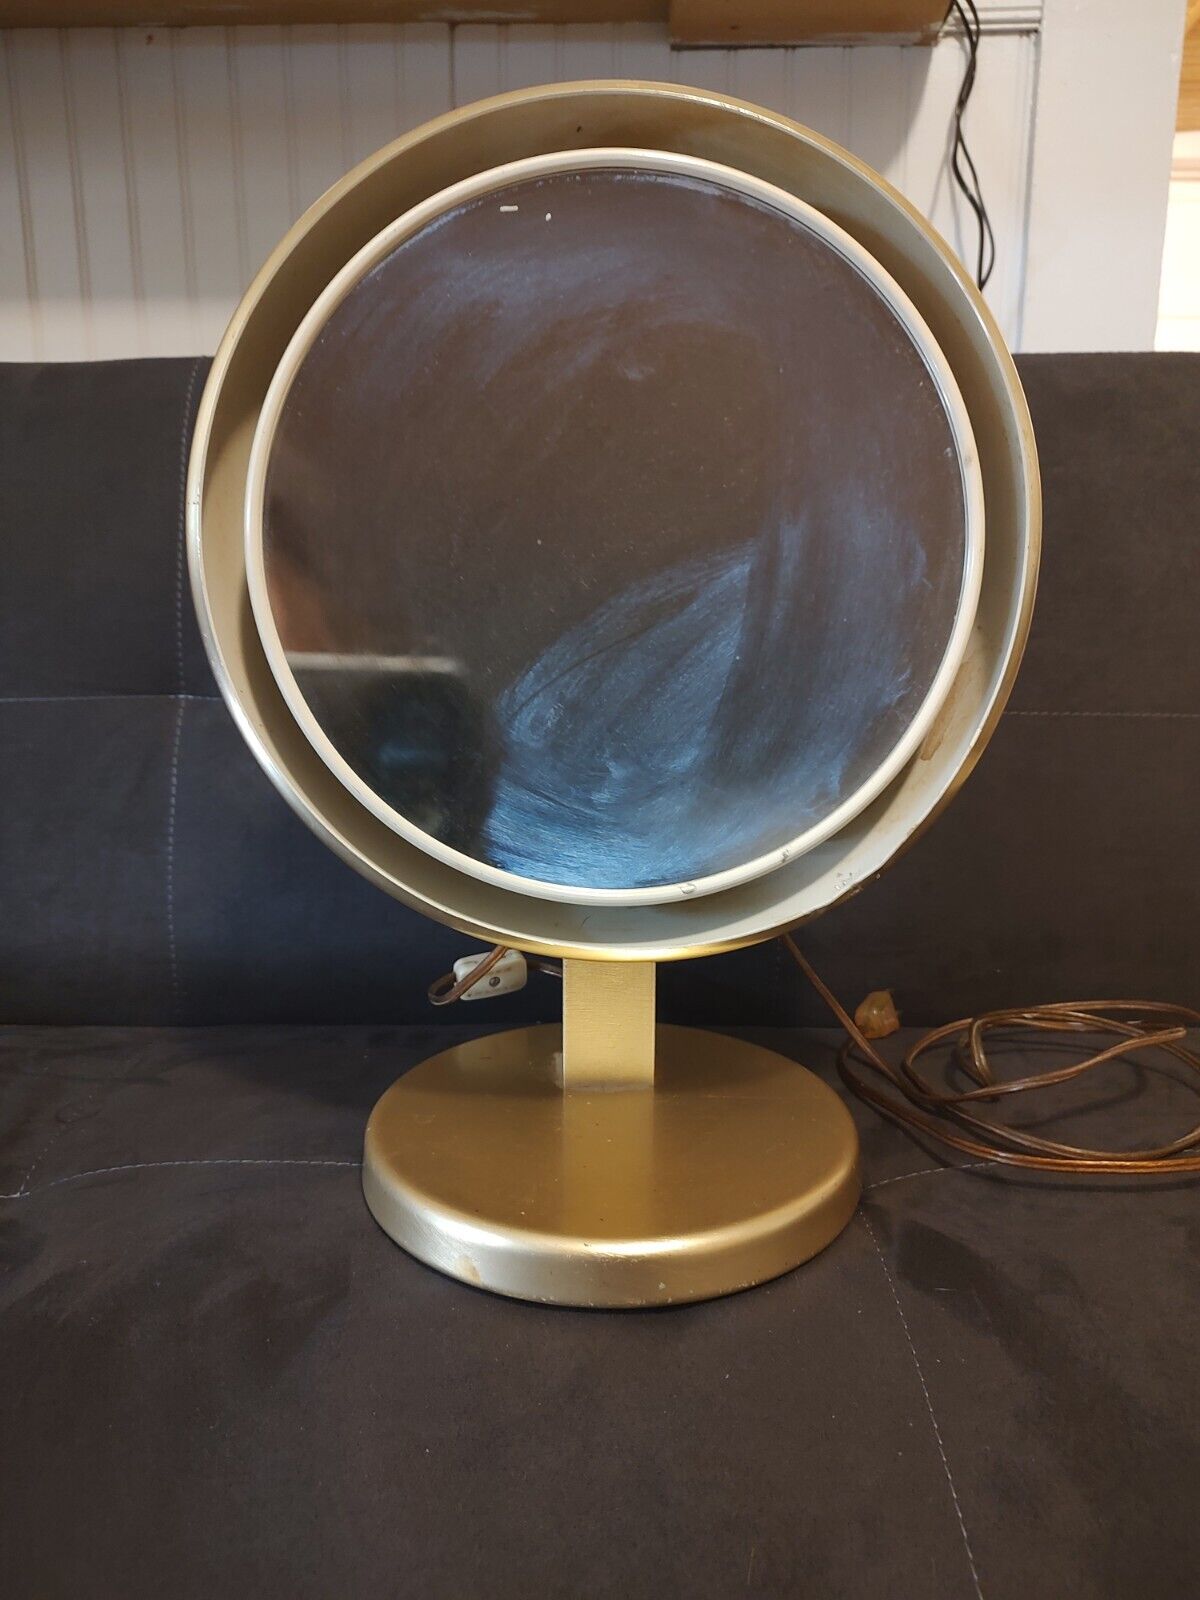 VTG Neiman Marcus Brushed Aluminum 11-3/4 Round Magnified Lighted Make Up Mirror